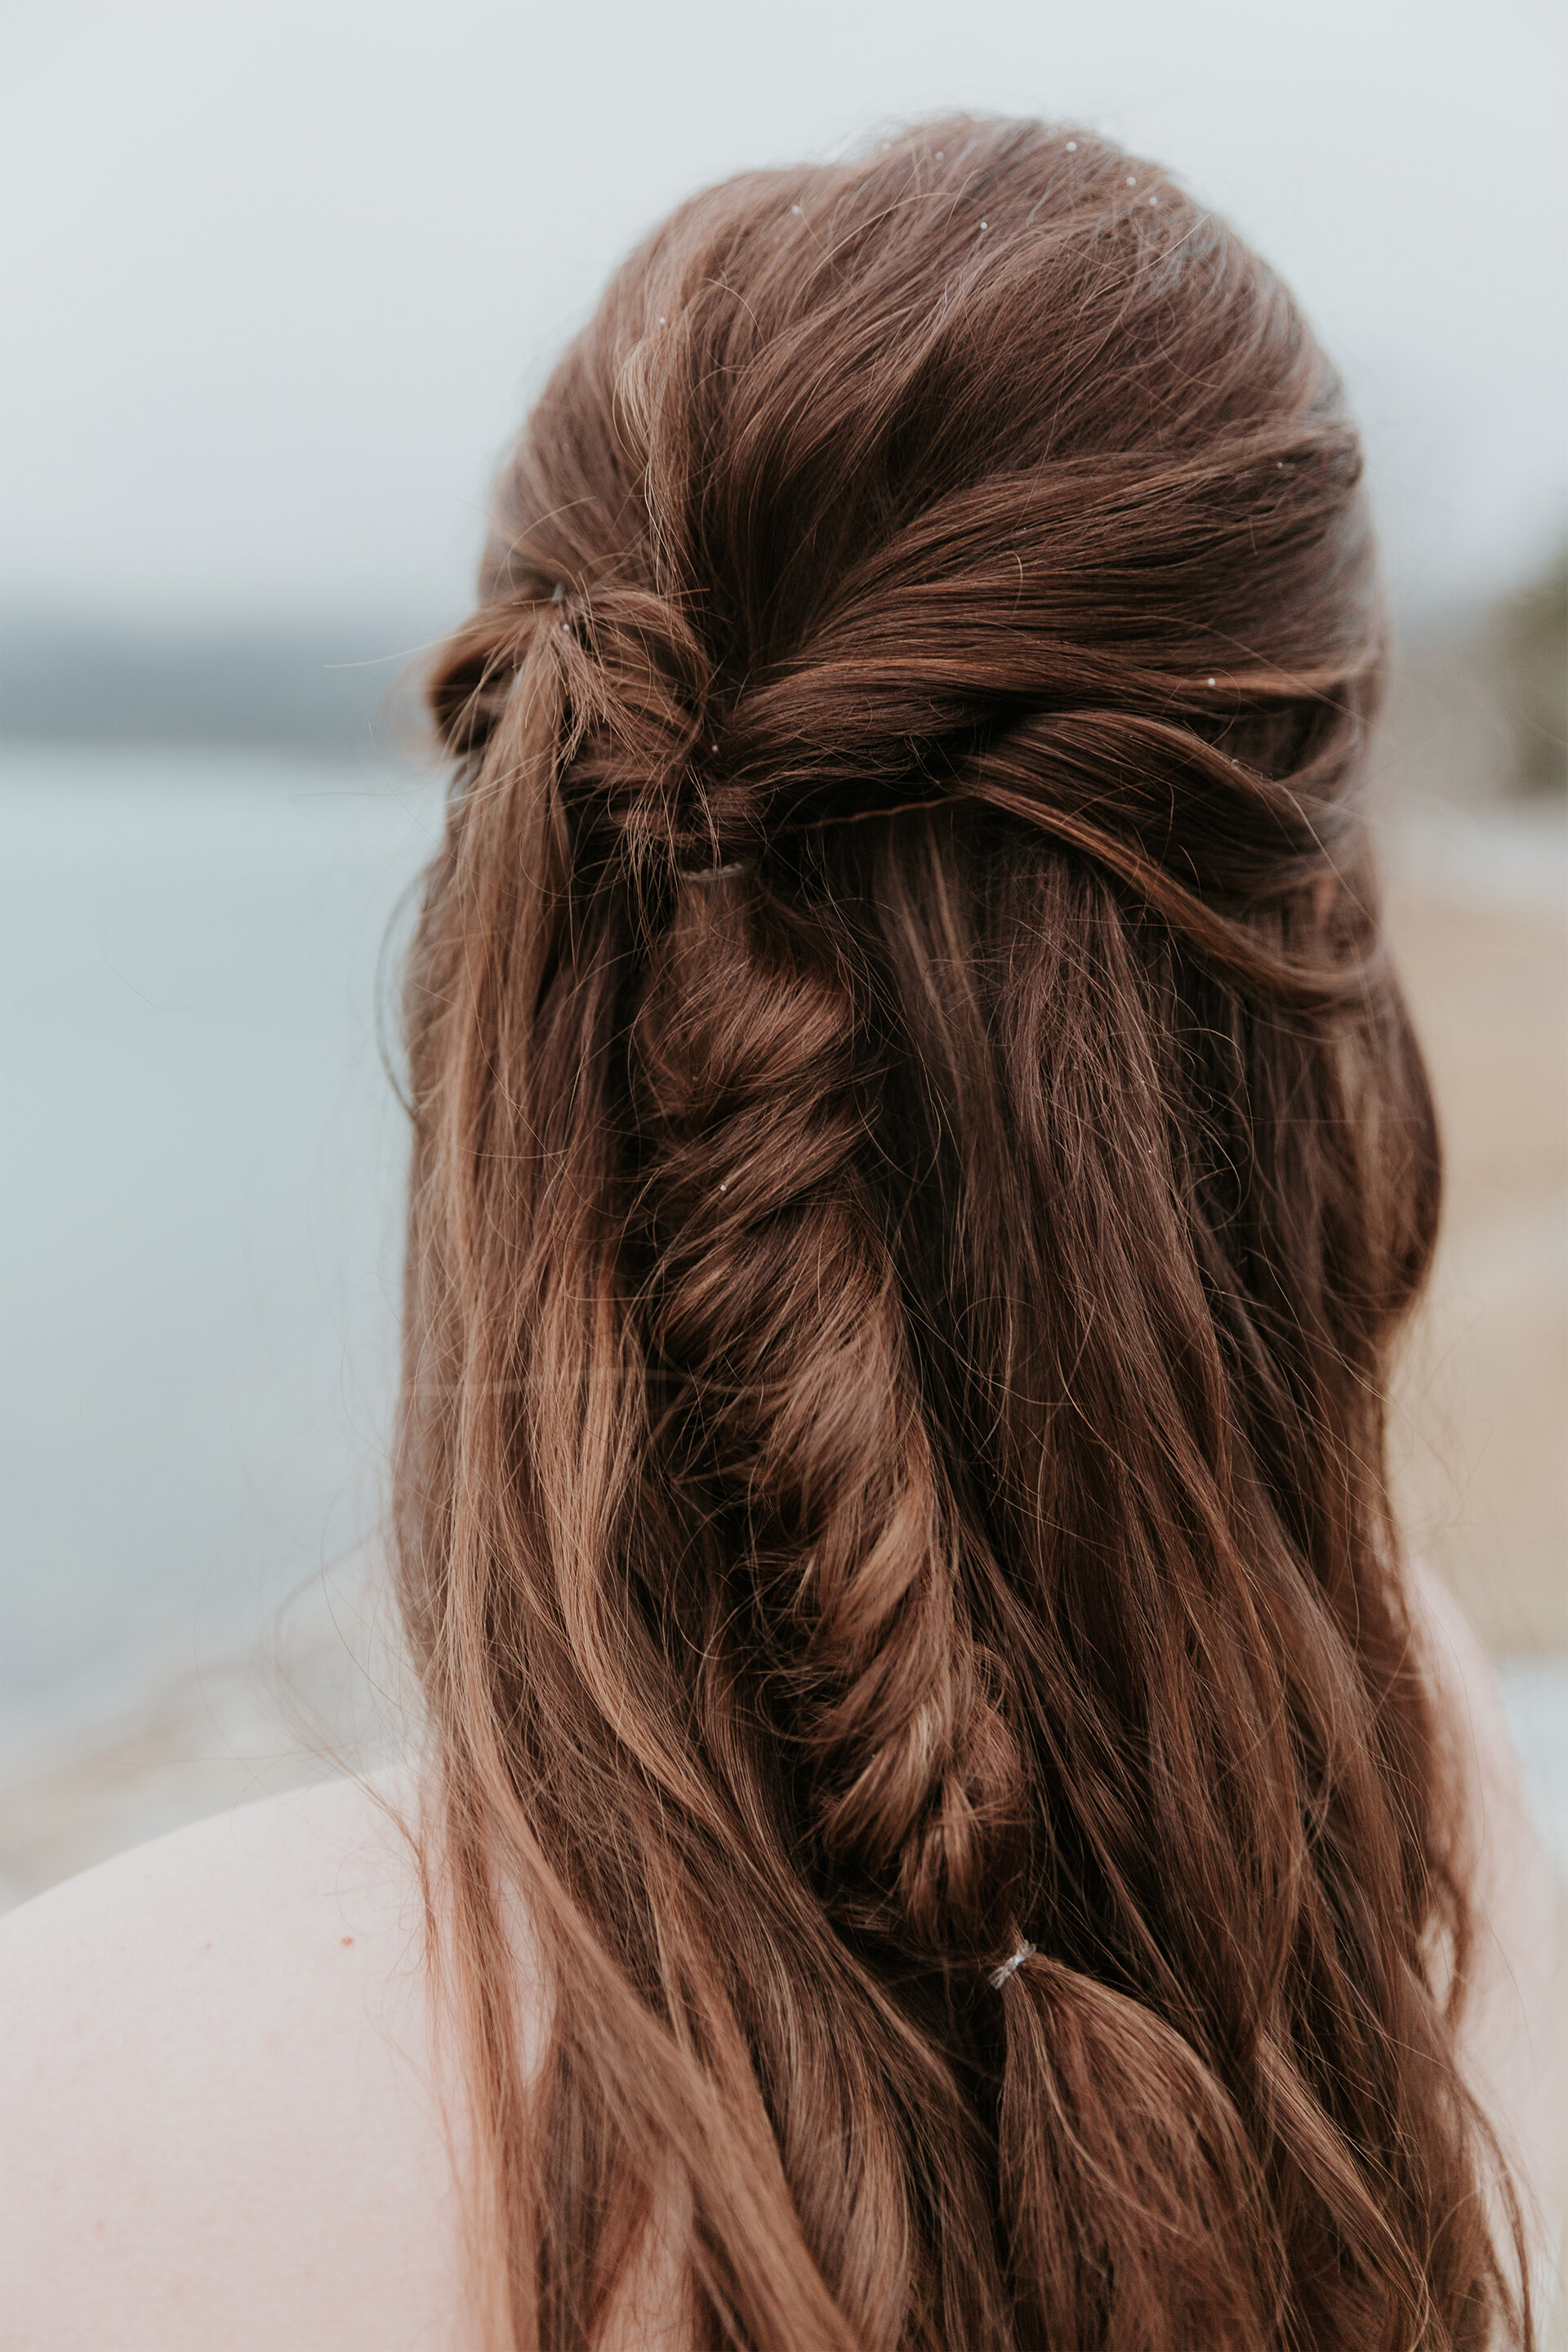 10 Wedding Hairstyles for the Boho Bride // Local Love